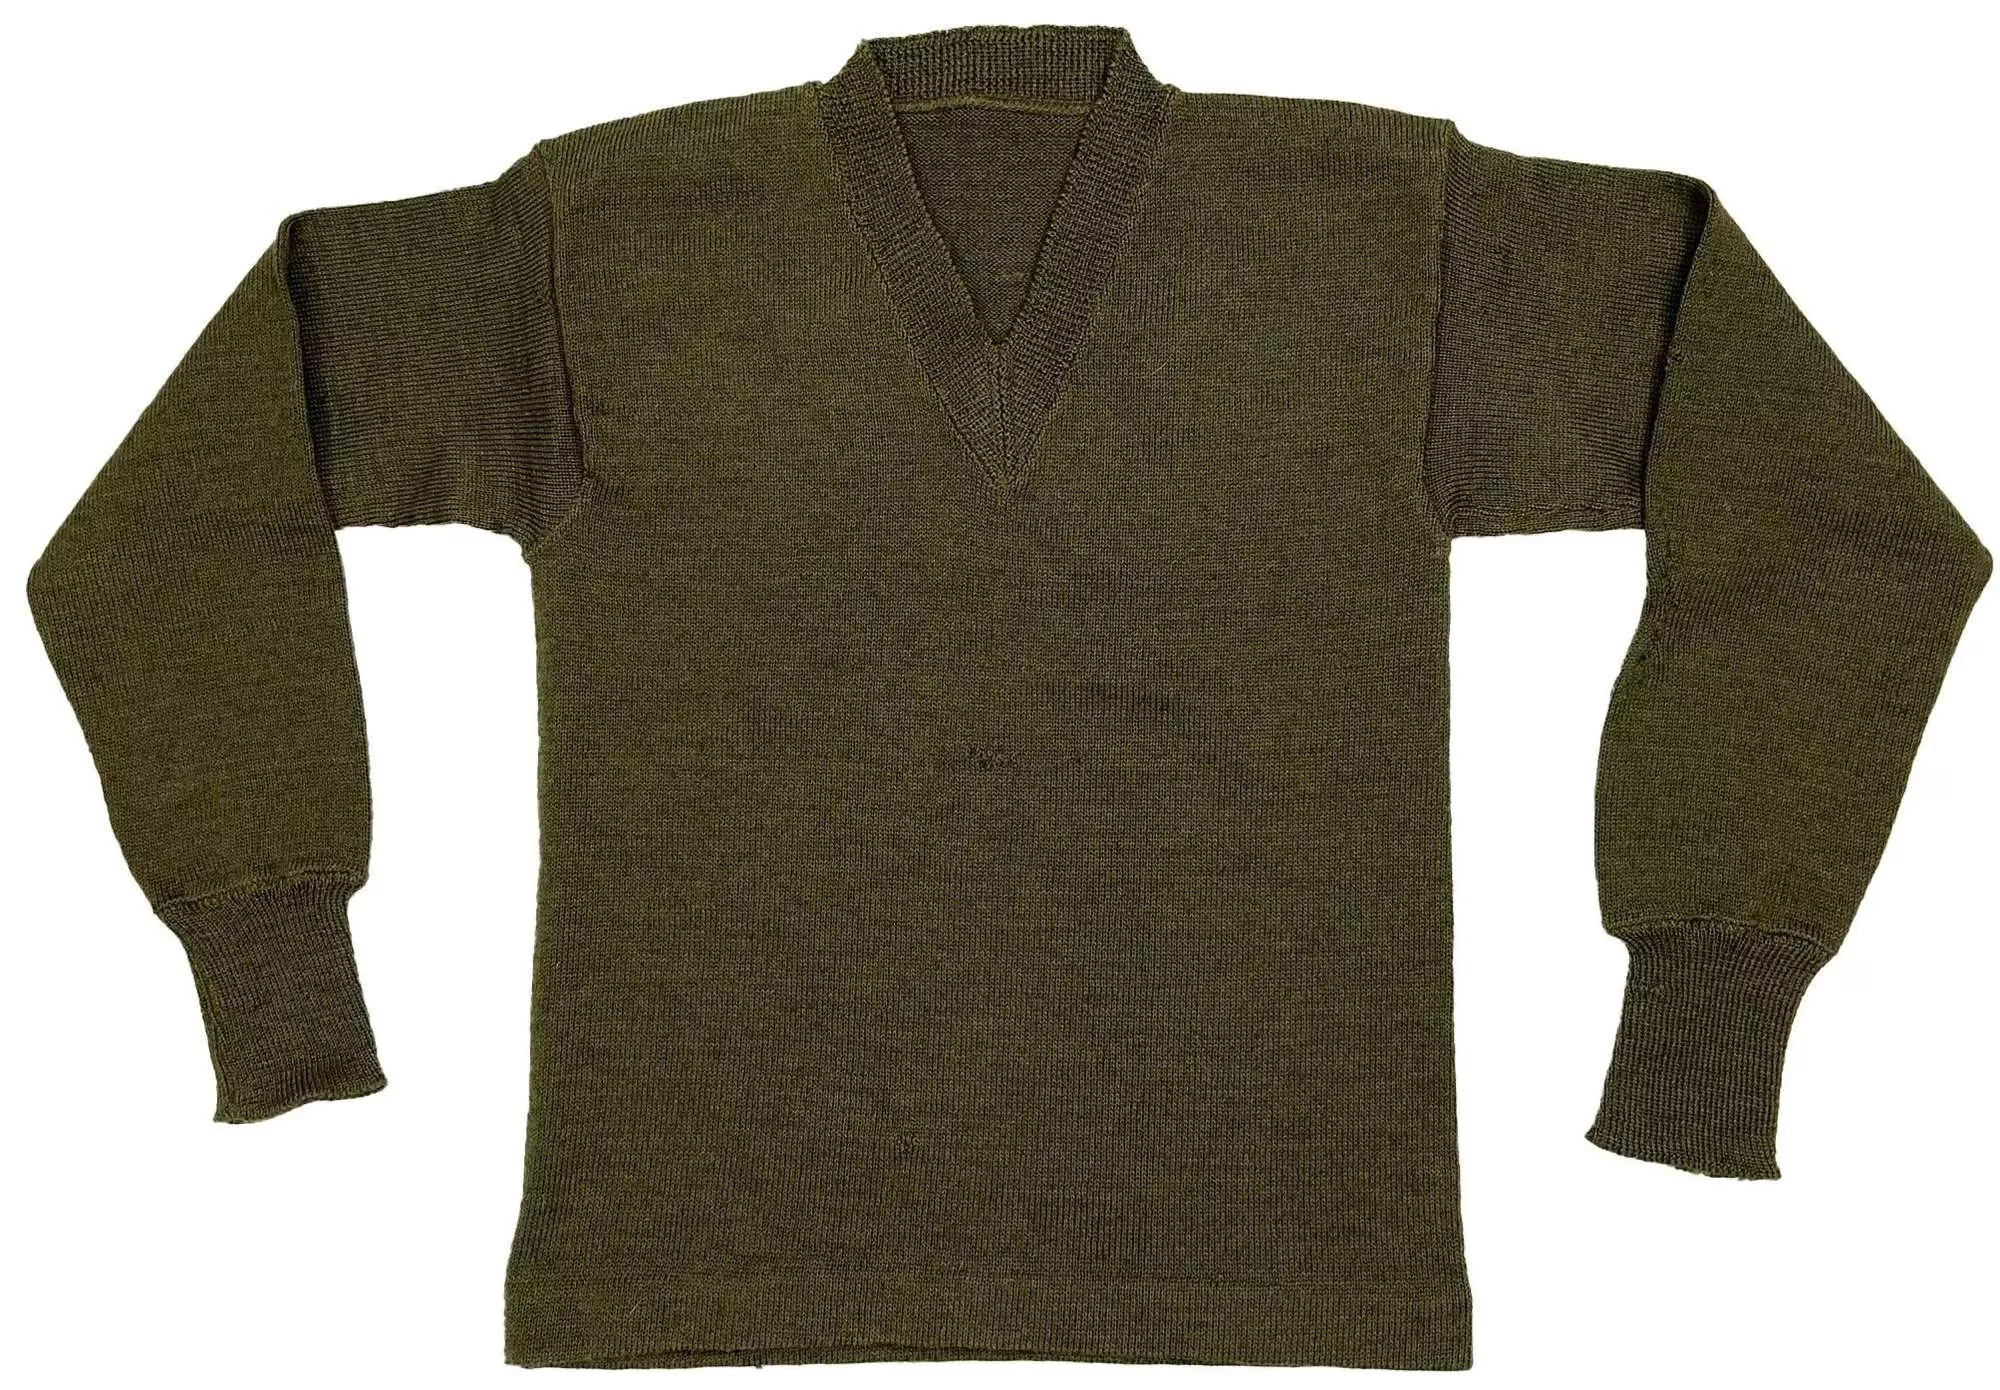 Original 1951 Dated British Army V Neck Jumper - Size 2 in smocks and tops